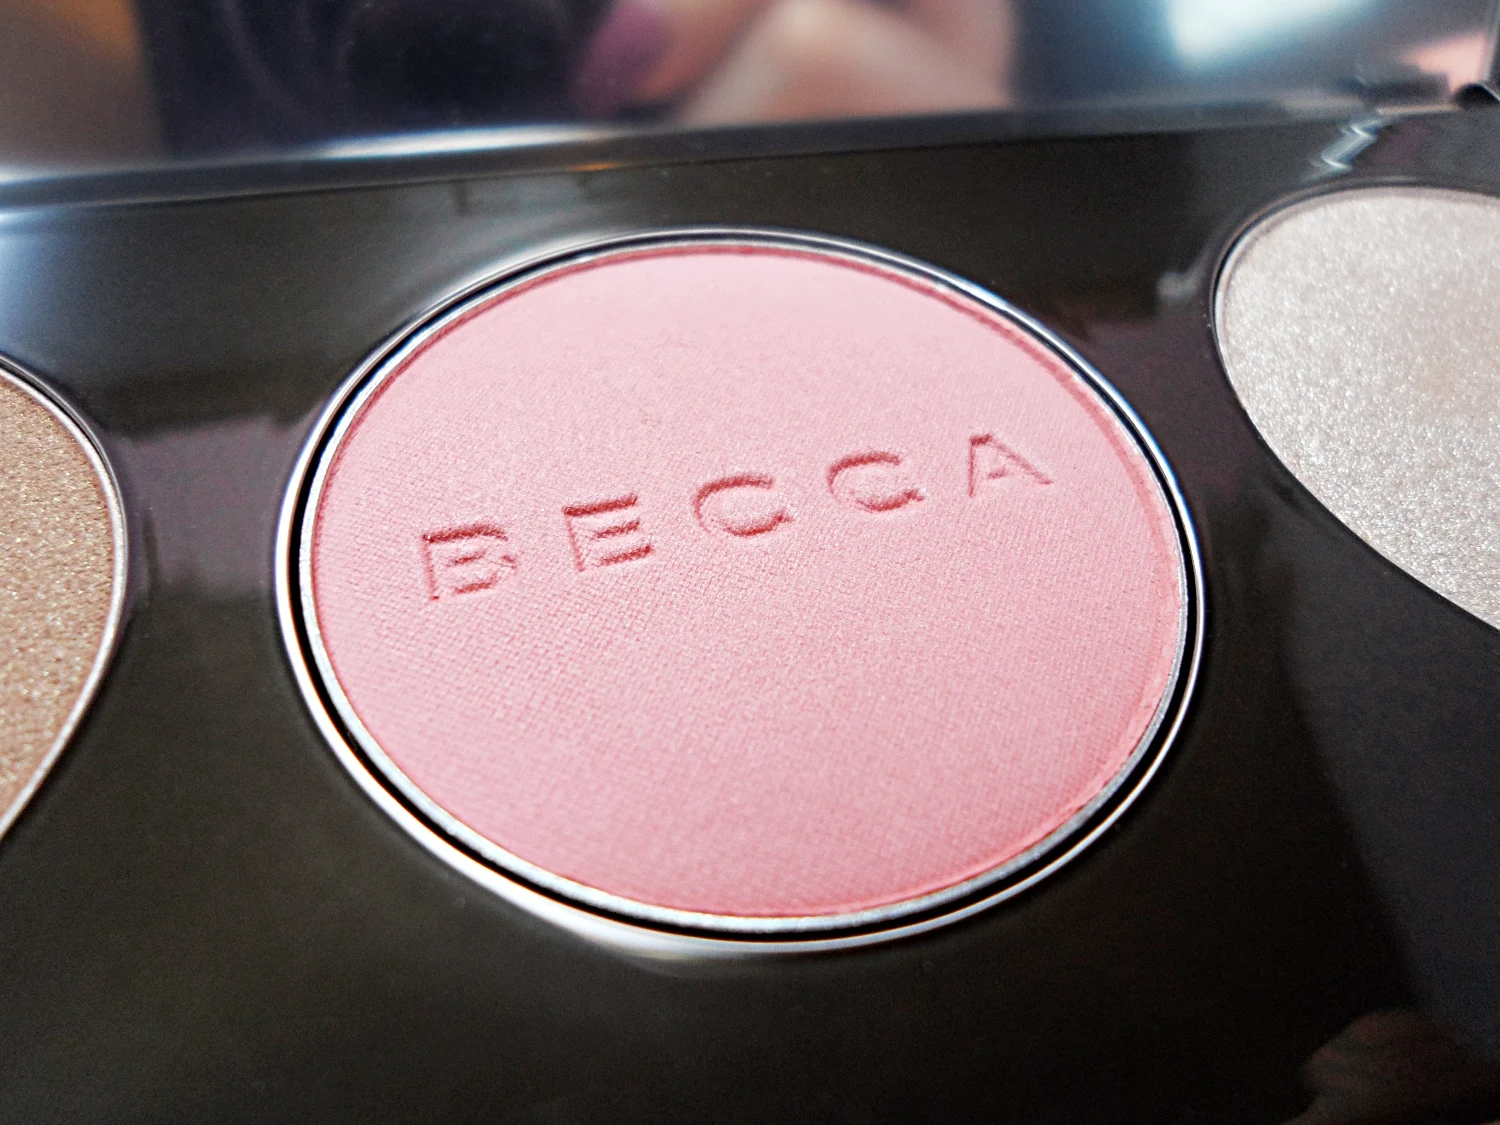 close-up of makeup contouring palette by Becca Cosmetics on a studio's rosy background